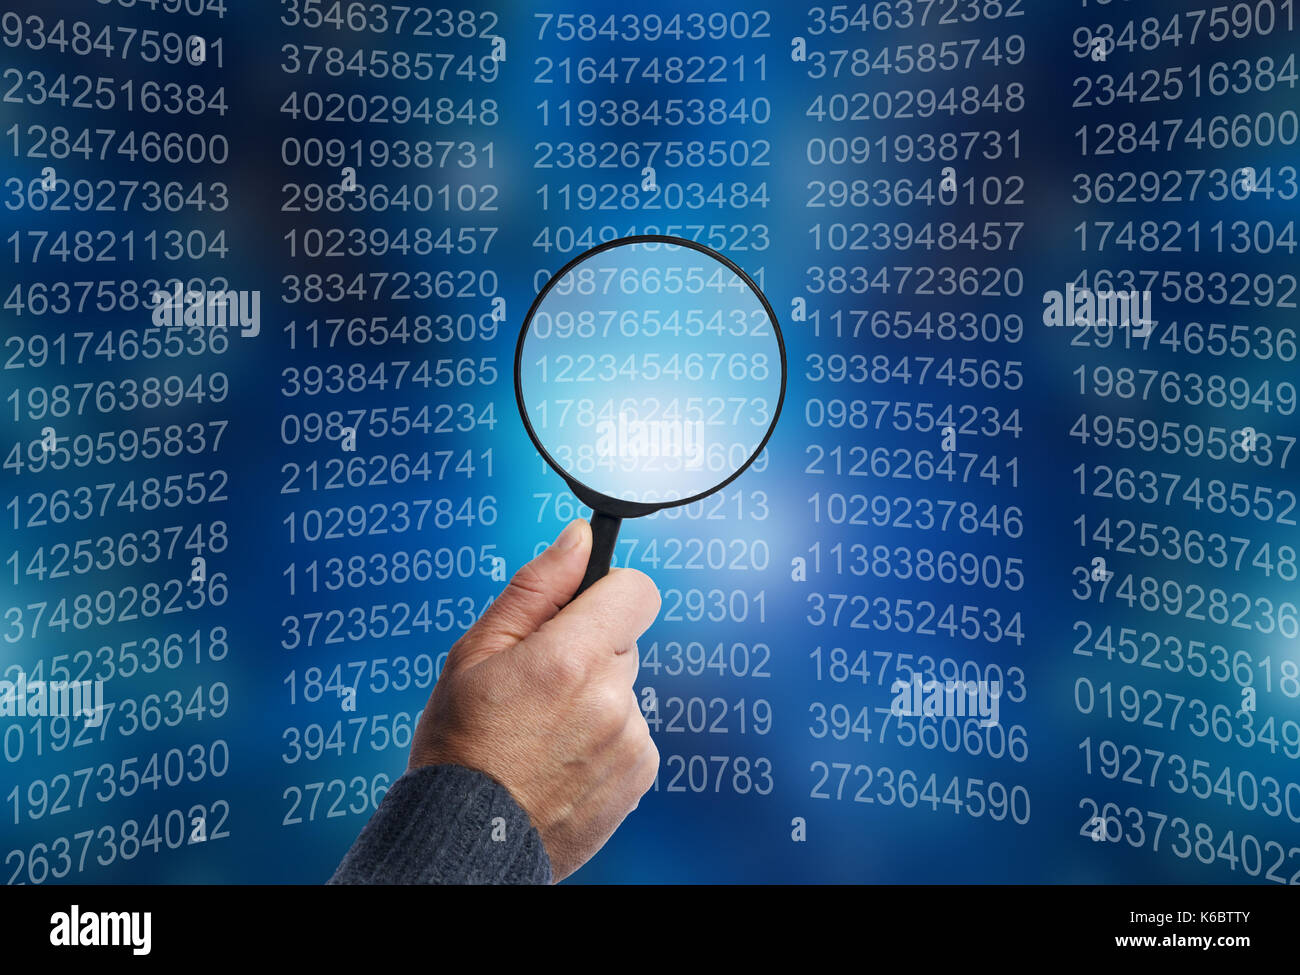 code verification and data access concept Stock Photo